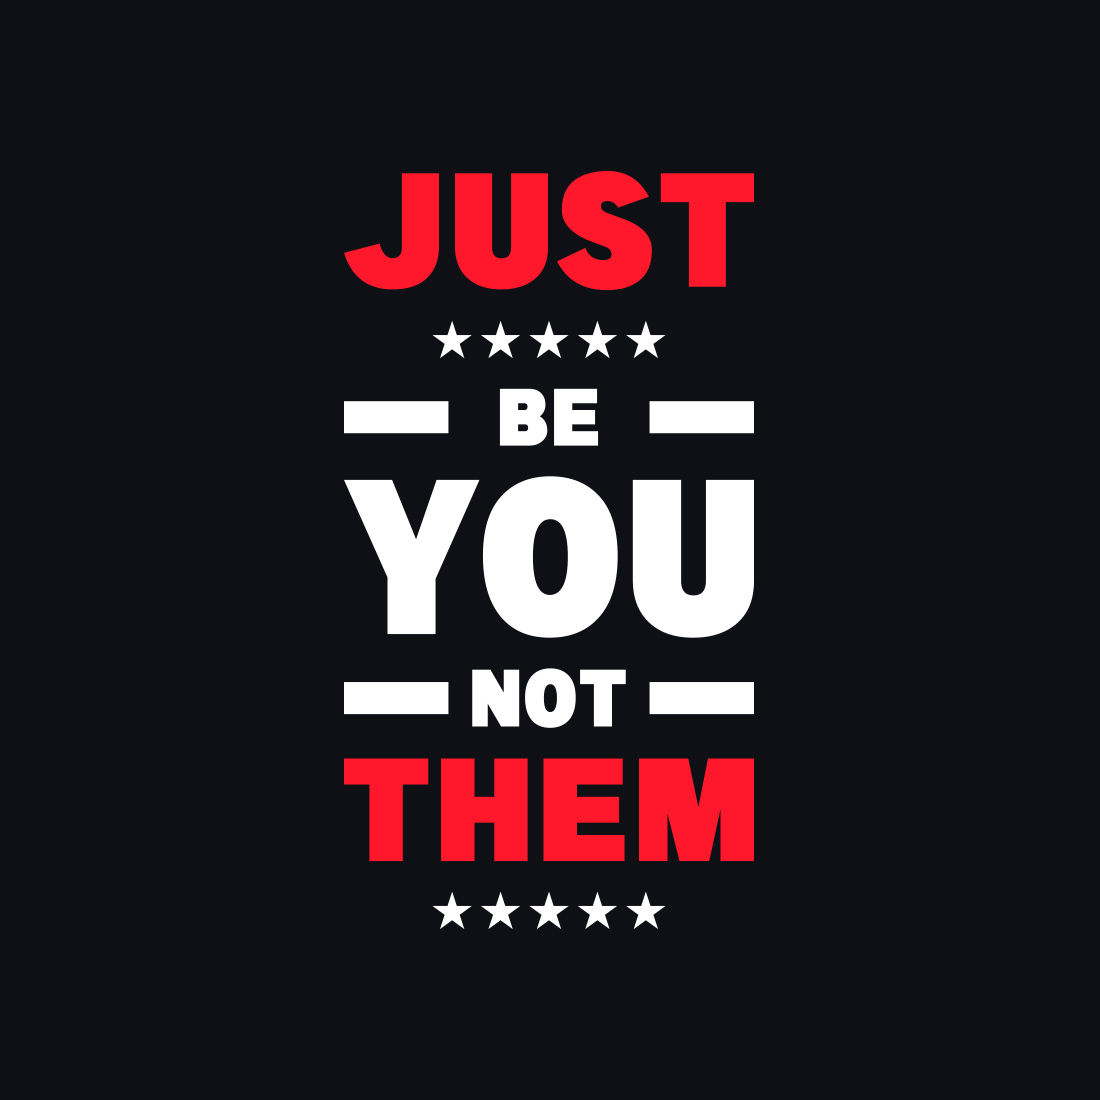 Just be you not them - quote design for t-shirt.